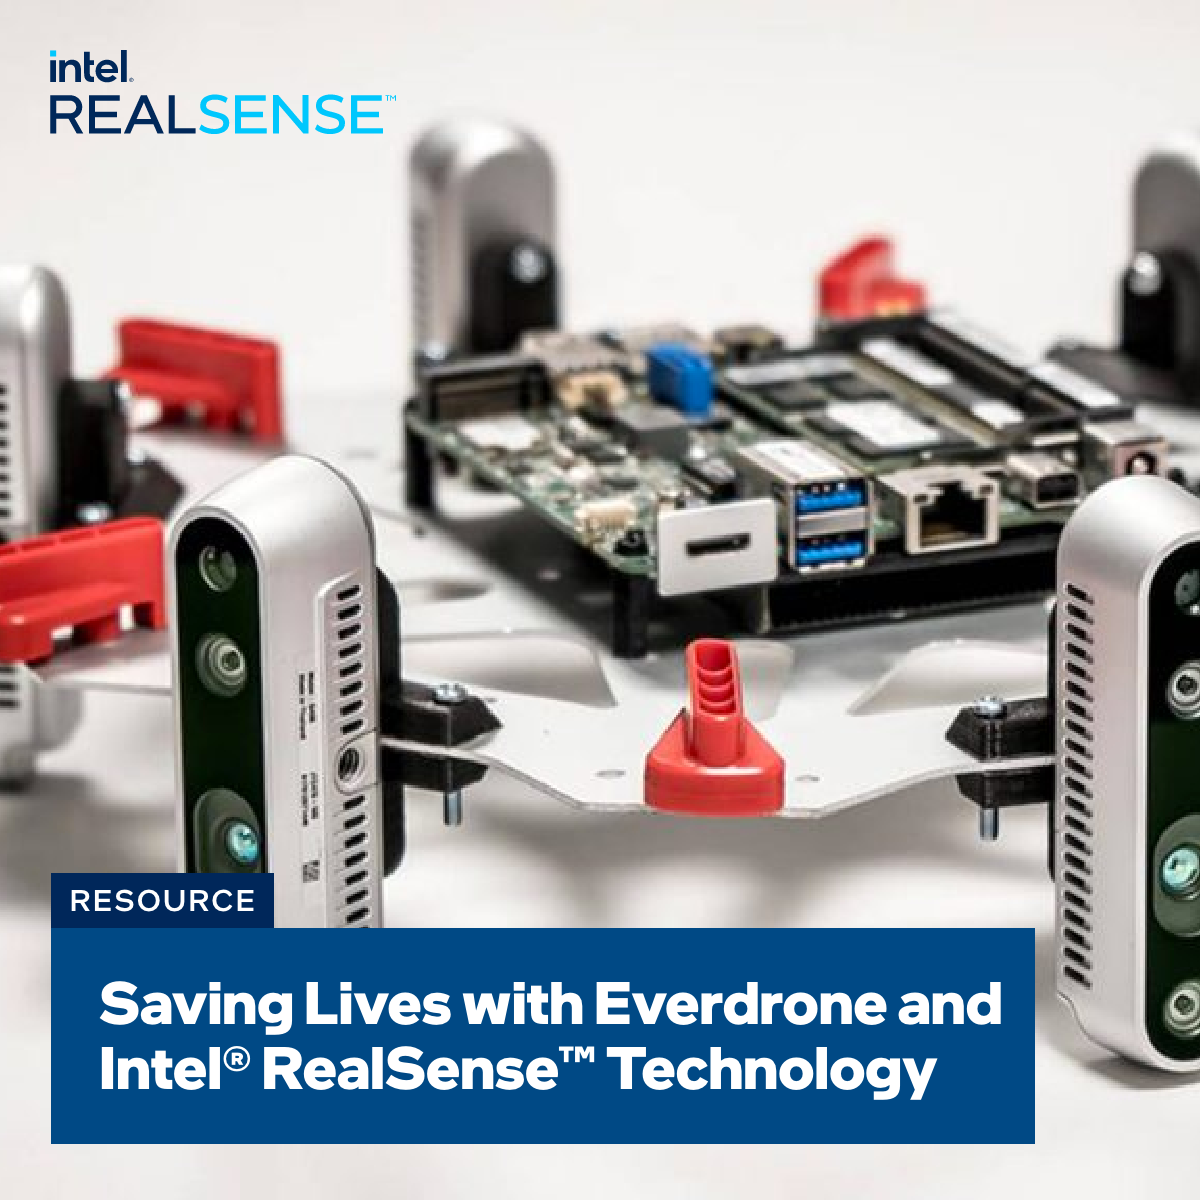 Saving lives with Everdrone and Intel® RealSense™ Technology